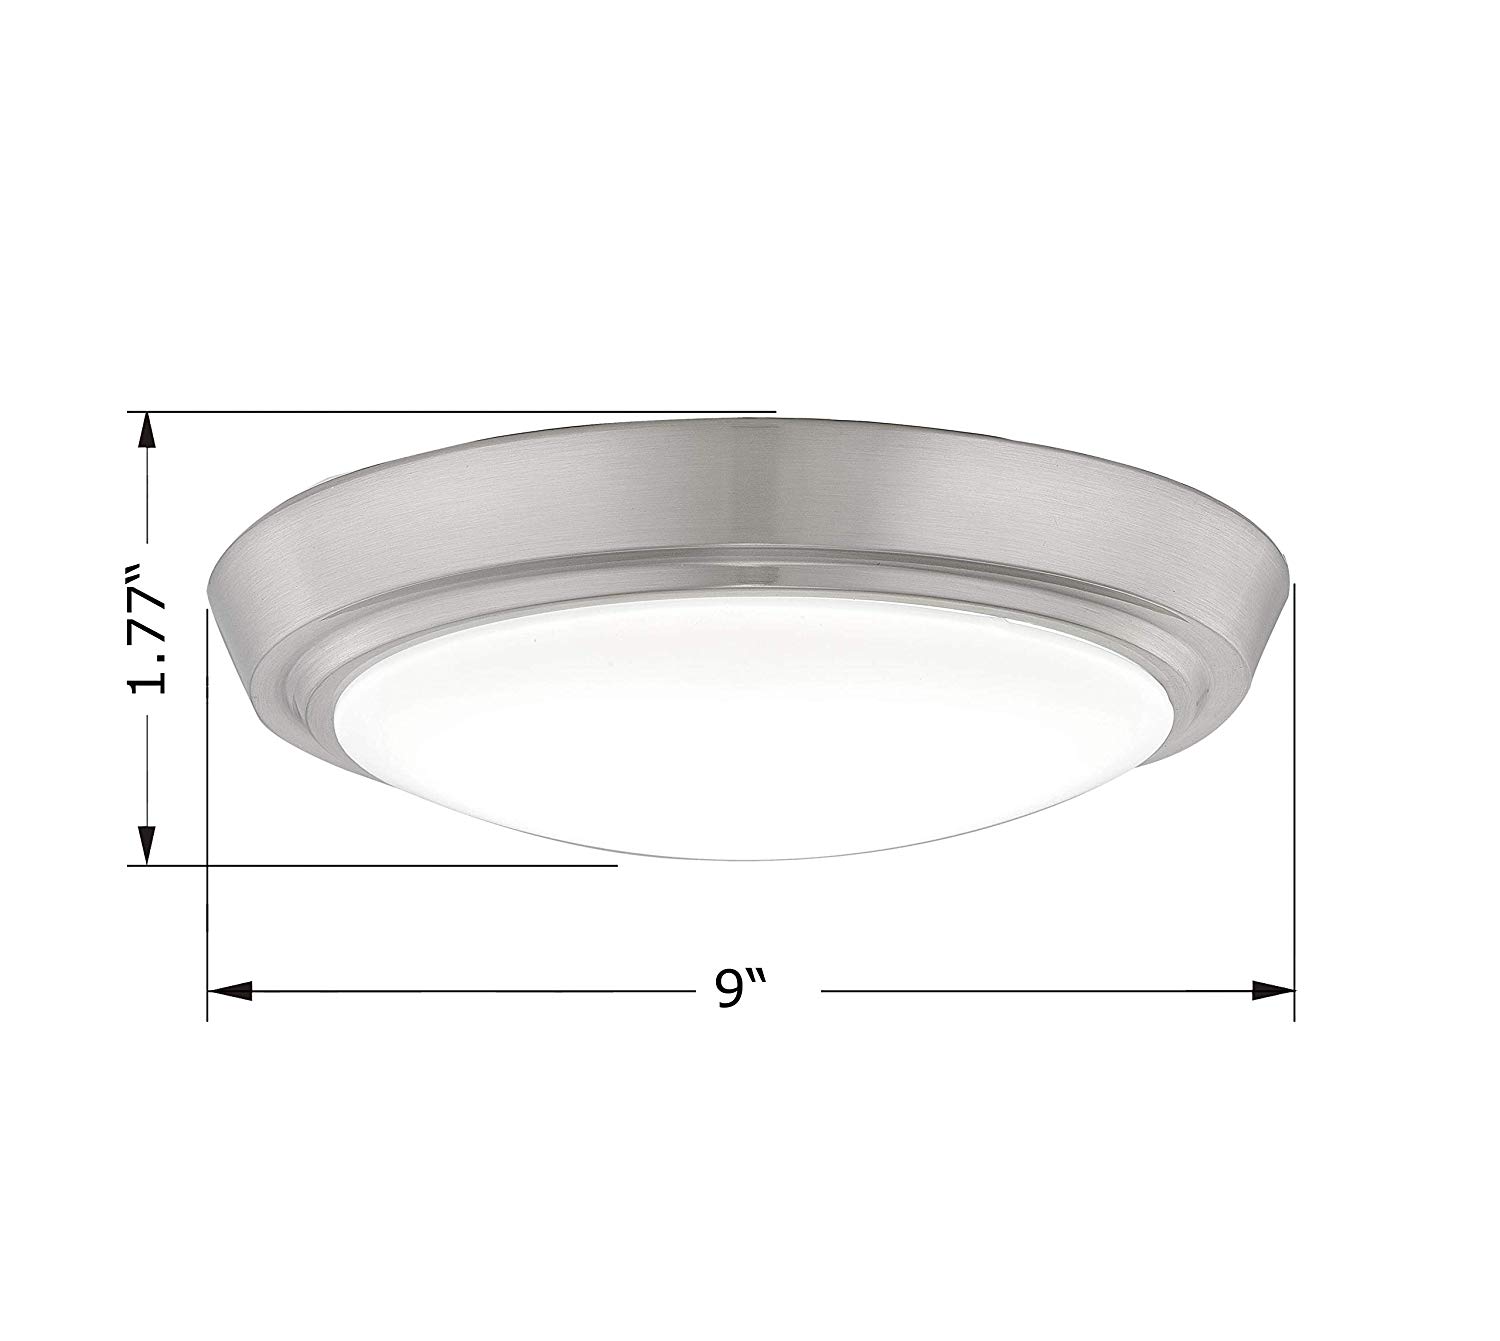 GRUENLICH LED Flush Mount Ceiling Lighting Fixture, 9 Inch Dimmable 15W (100W Replacement) 1000 Lumen, Metal Housing with Nickel Finish, ETL and Damp Location Rated, 2-Pack